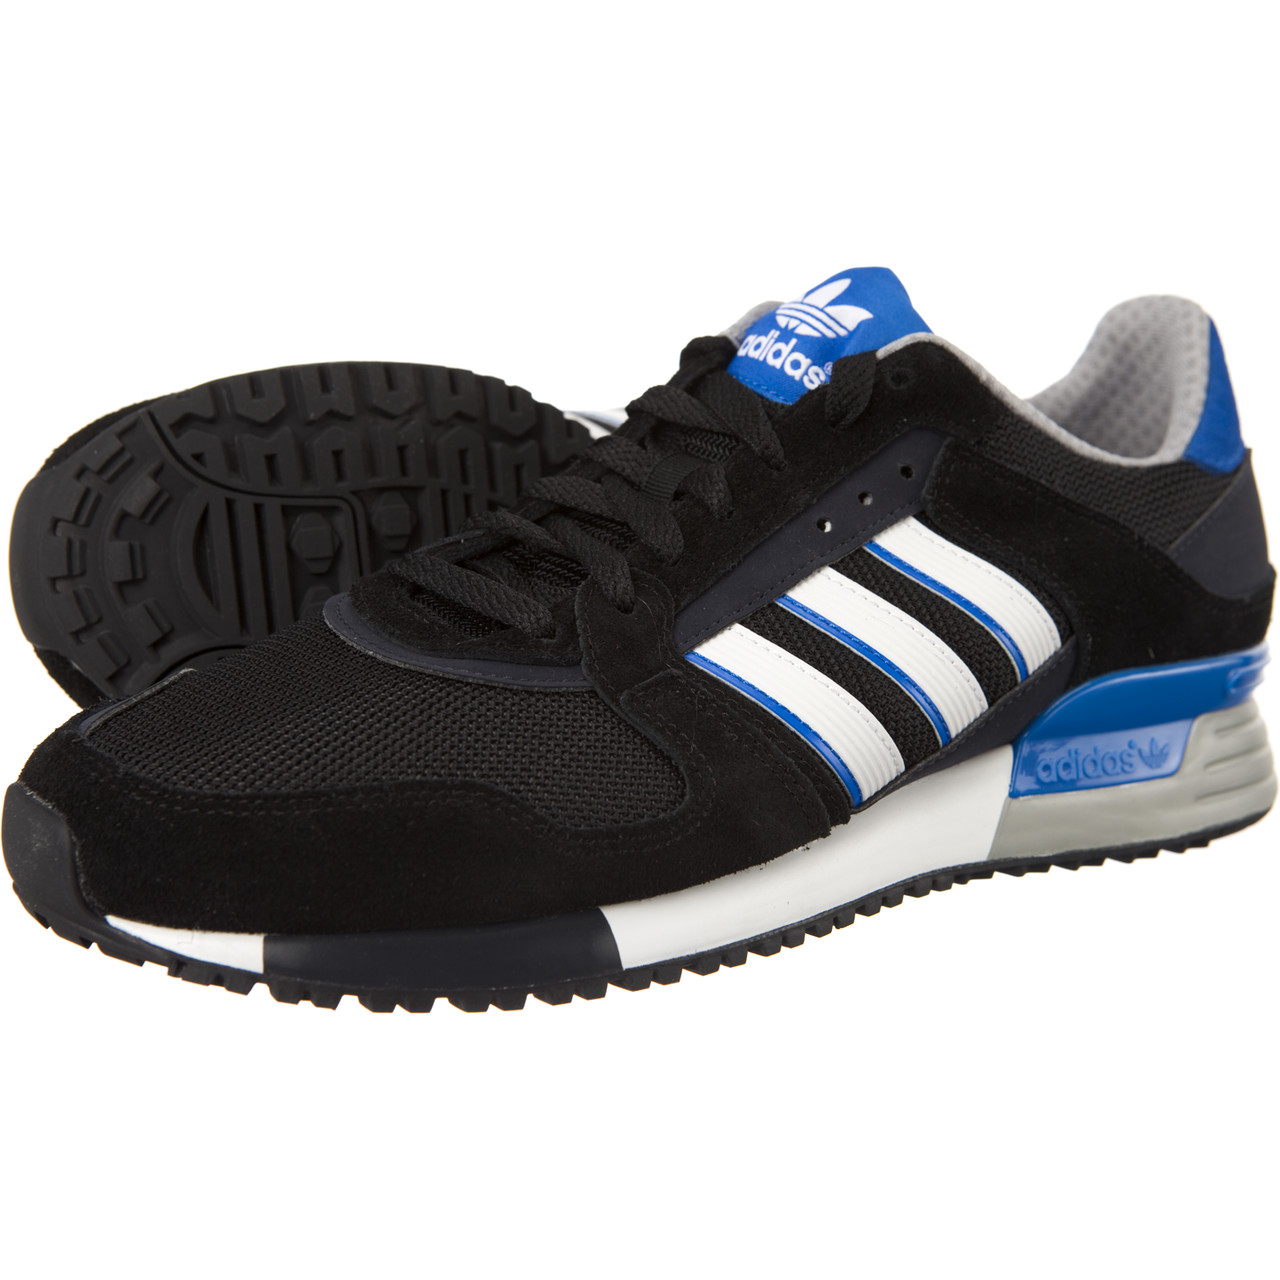 adidas zx 650 2014 homme